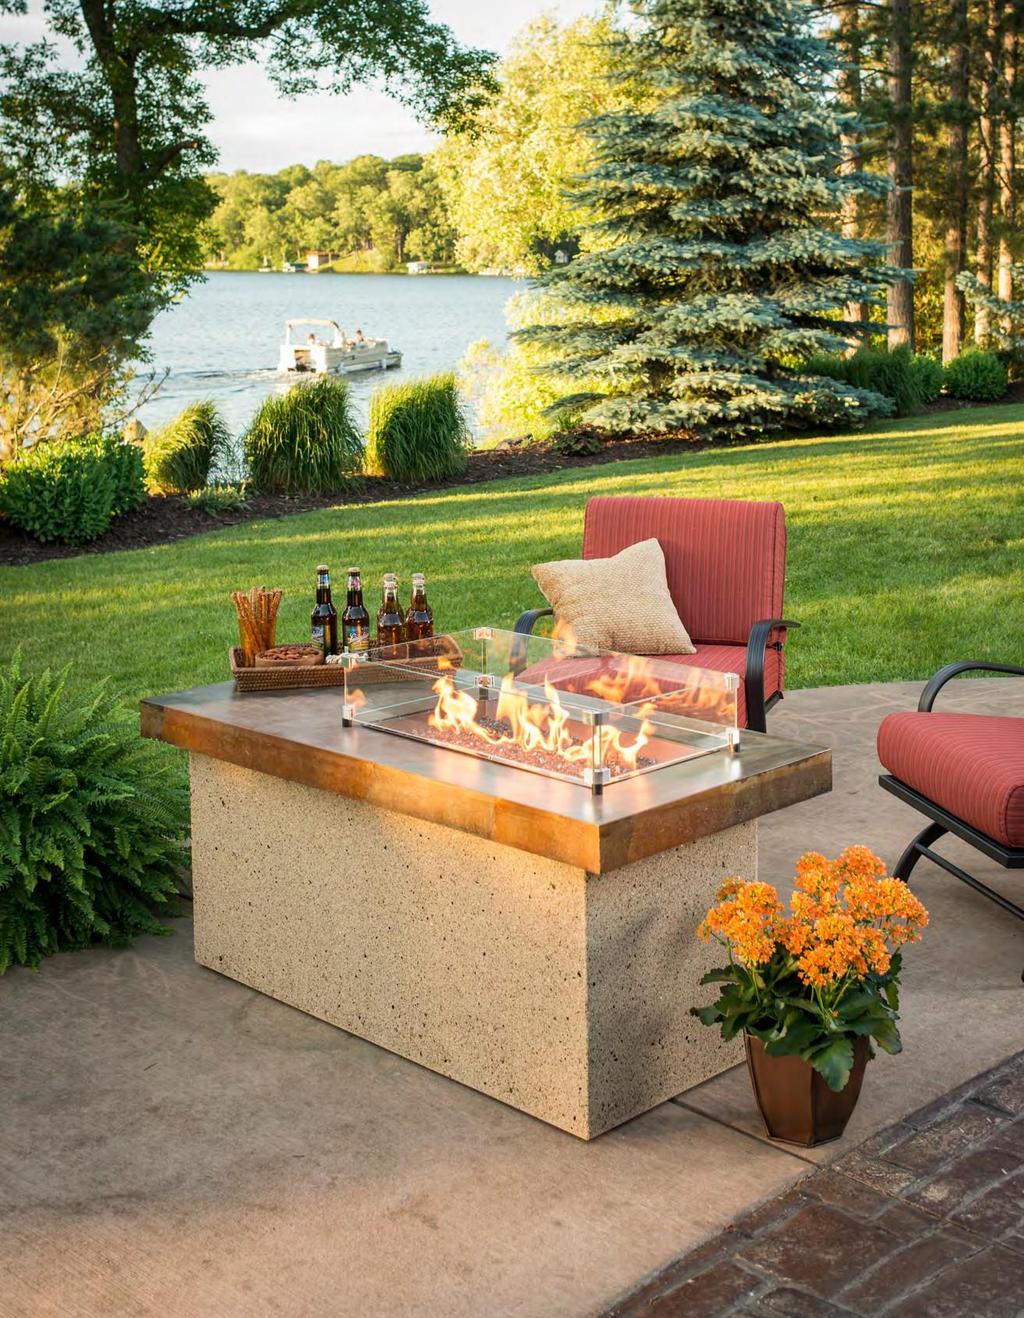 F I R E P I T S A warm, cozy fire for every space Light up the night and add warmth to your outdoor space with a beautiful fire pit, fire pit table, or table top model.